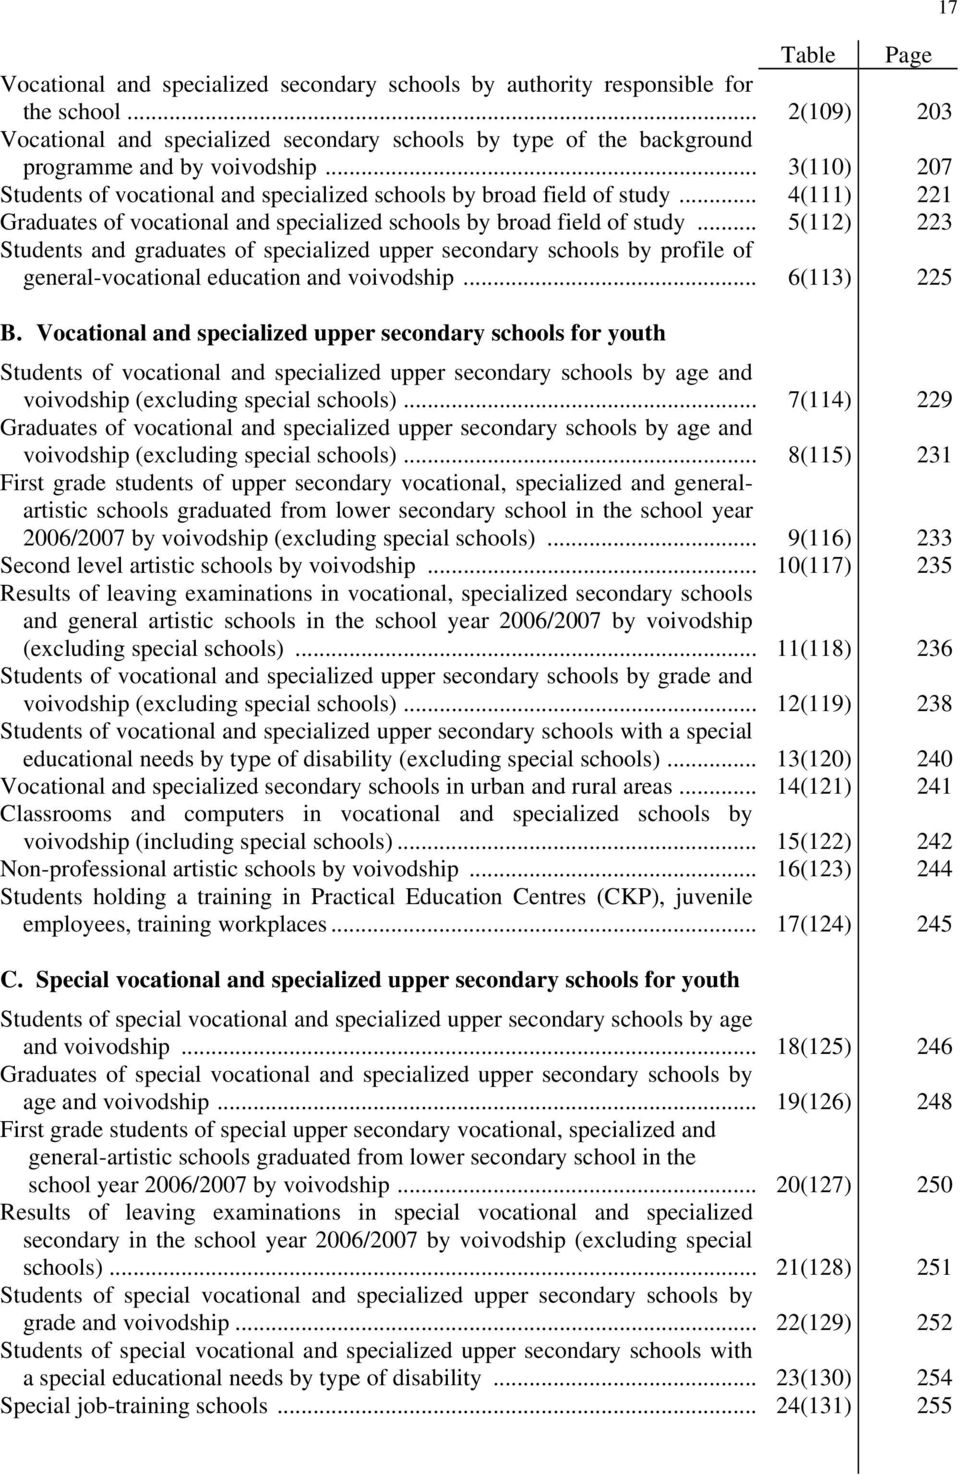 .. Students and graduates of specialized upper secondary schools by profile of general-vocational education and voivodship... B.